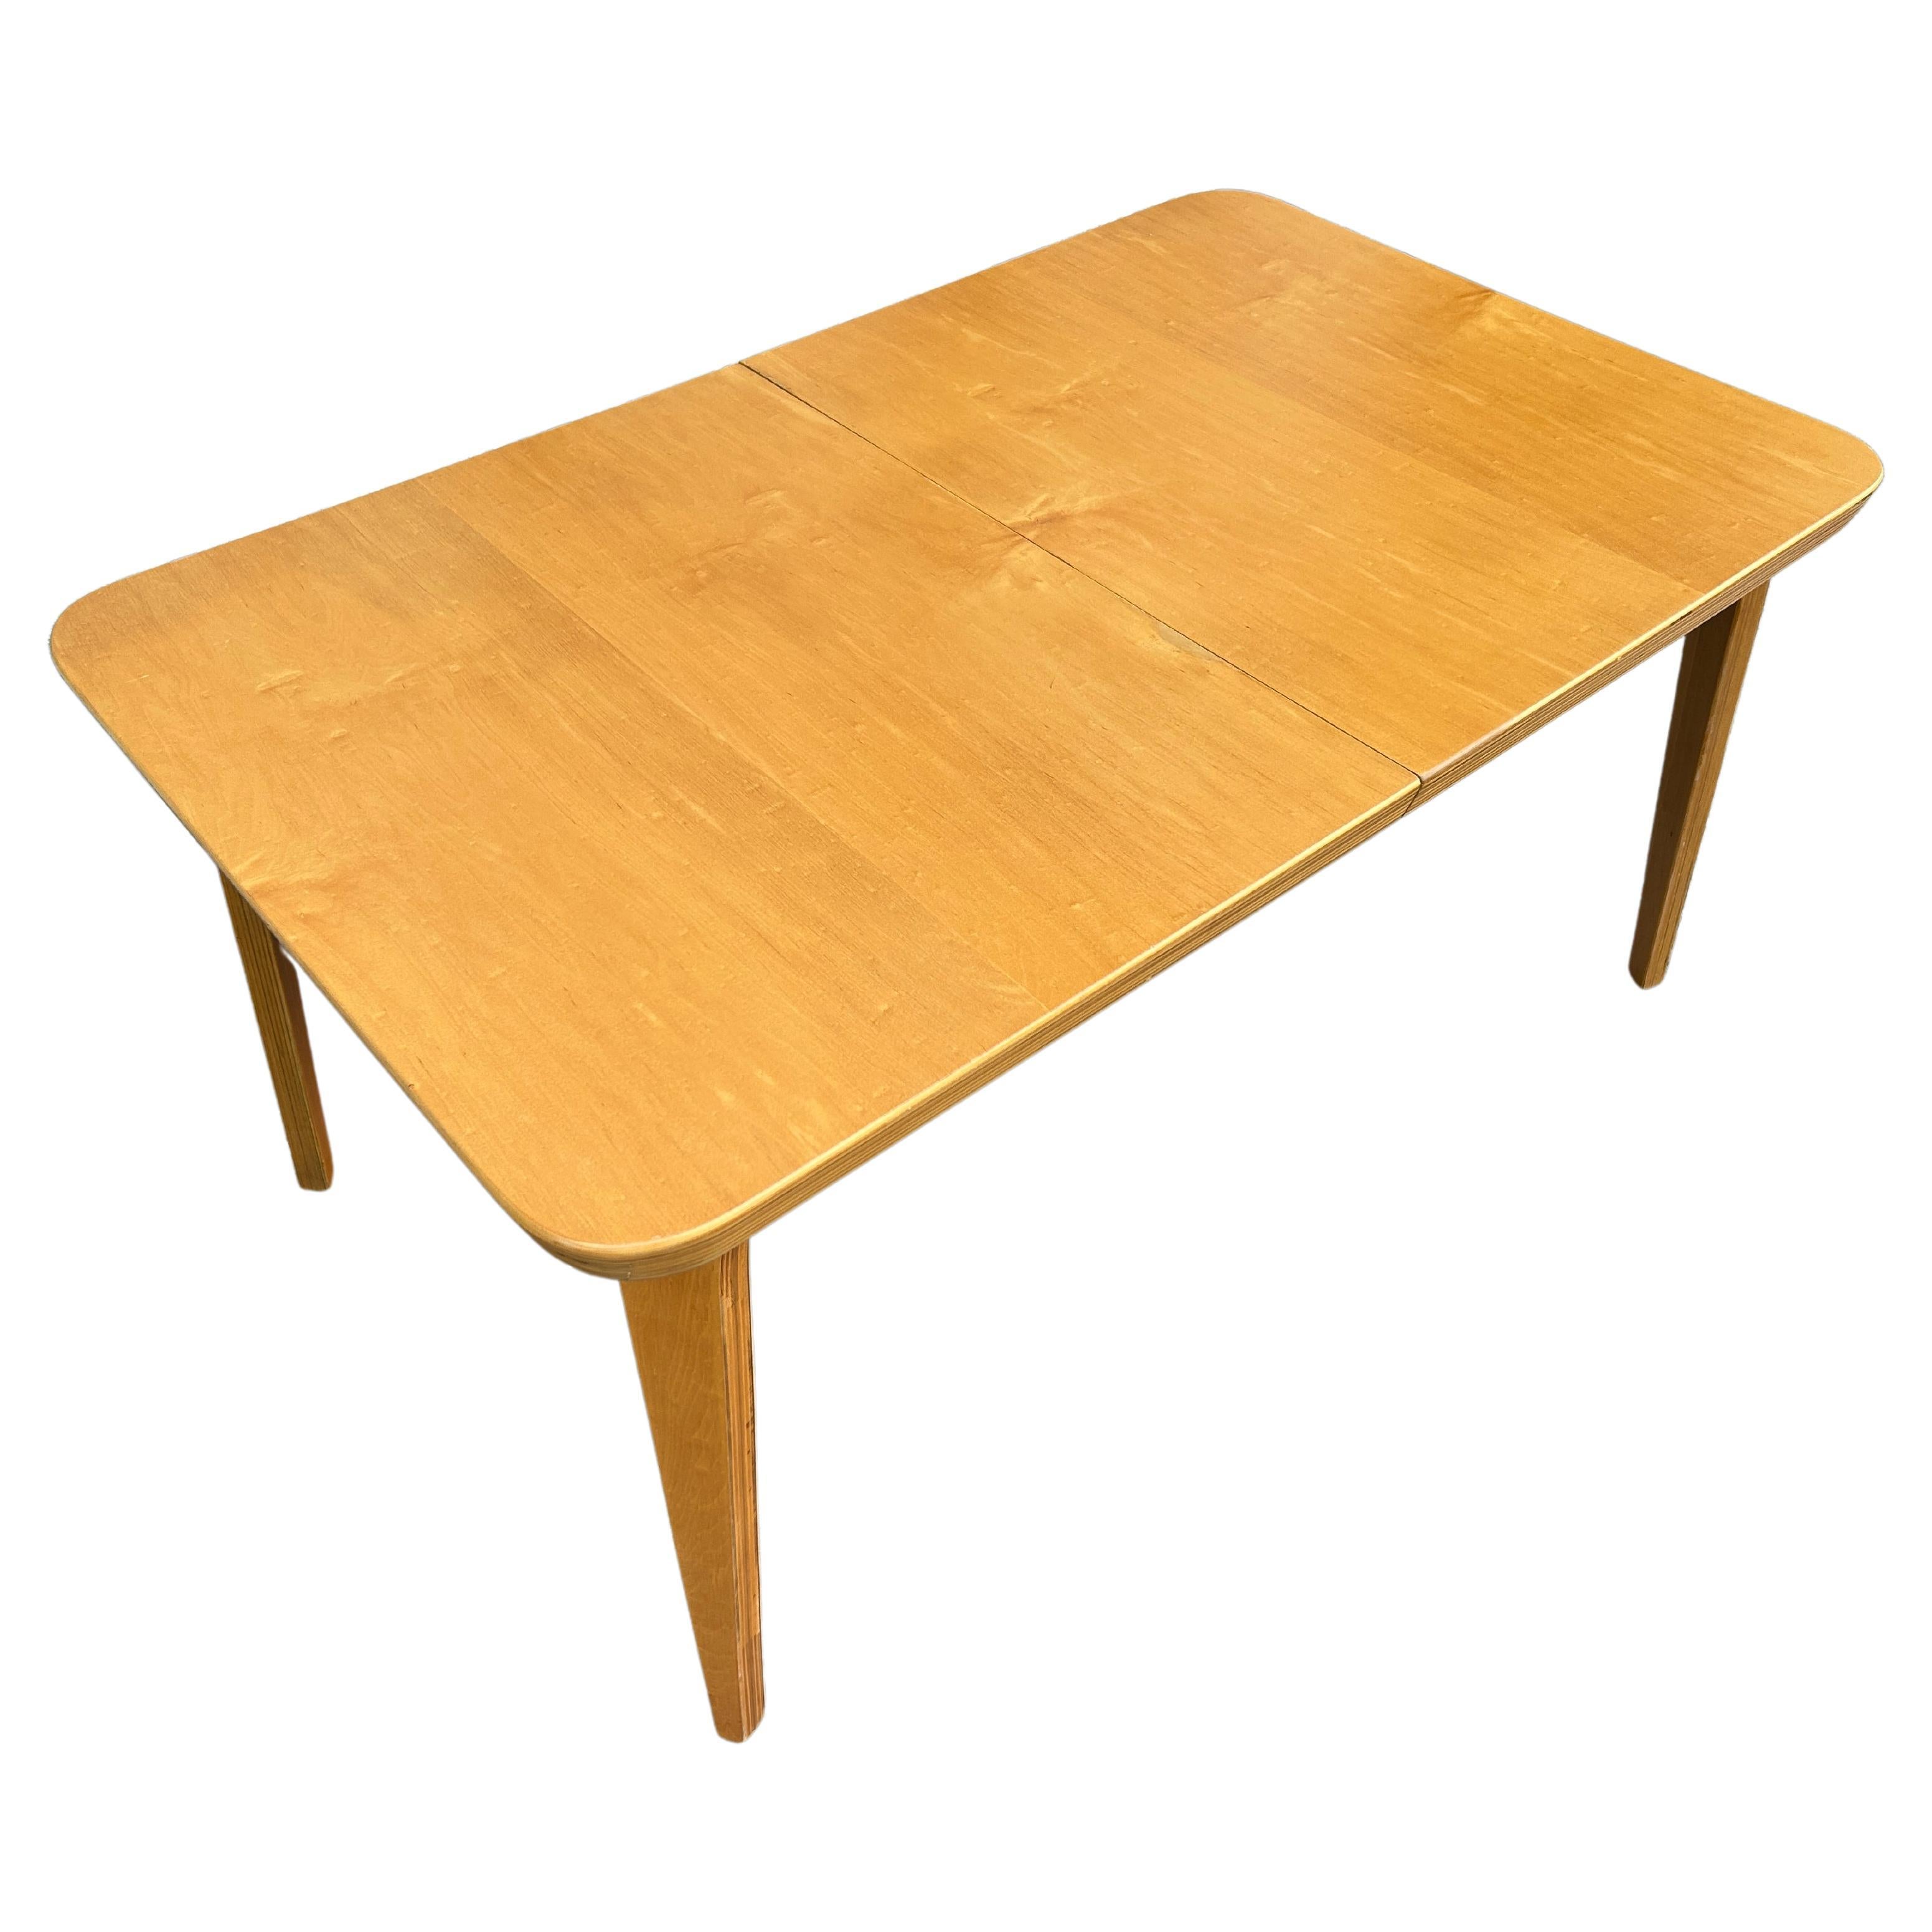 Mid-Century Modern Bentwood Rounded Corner Birch Blonde Dining Table with Leaf